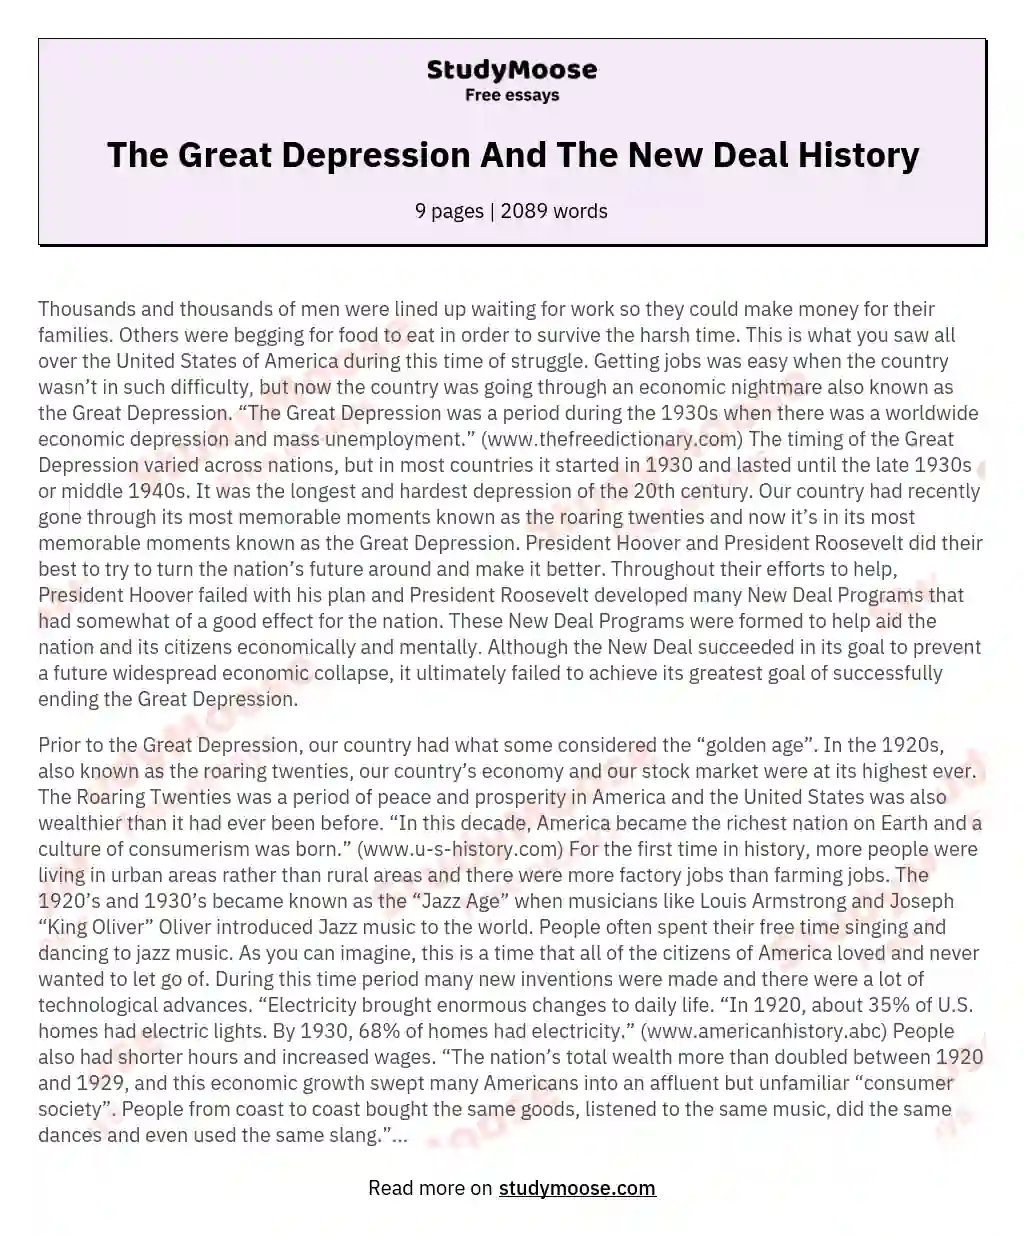 The Great Depression And The New Deal History